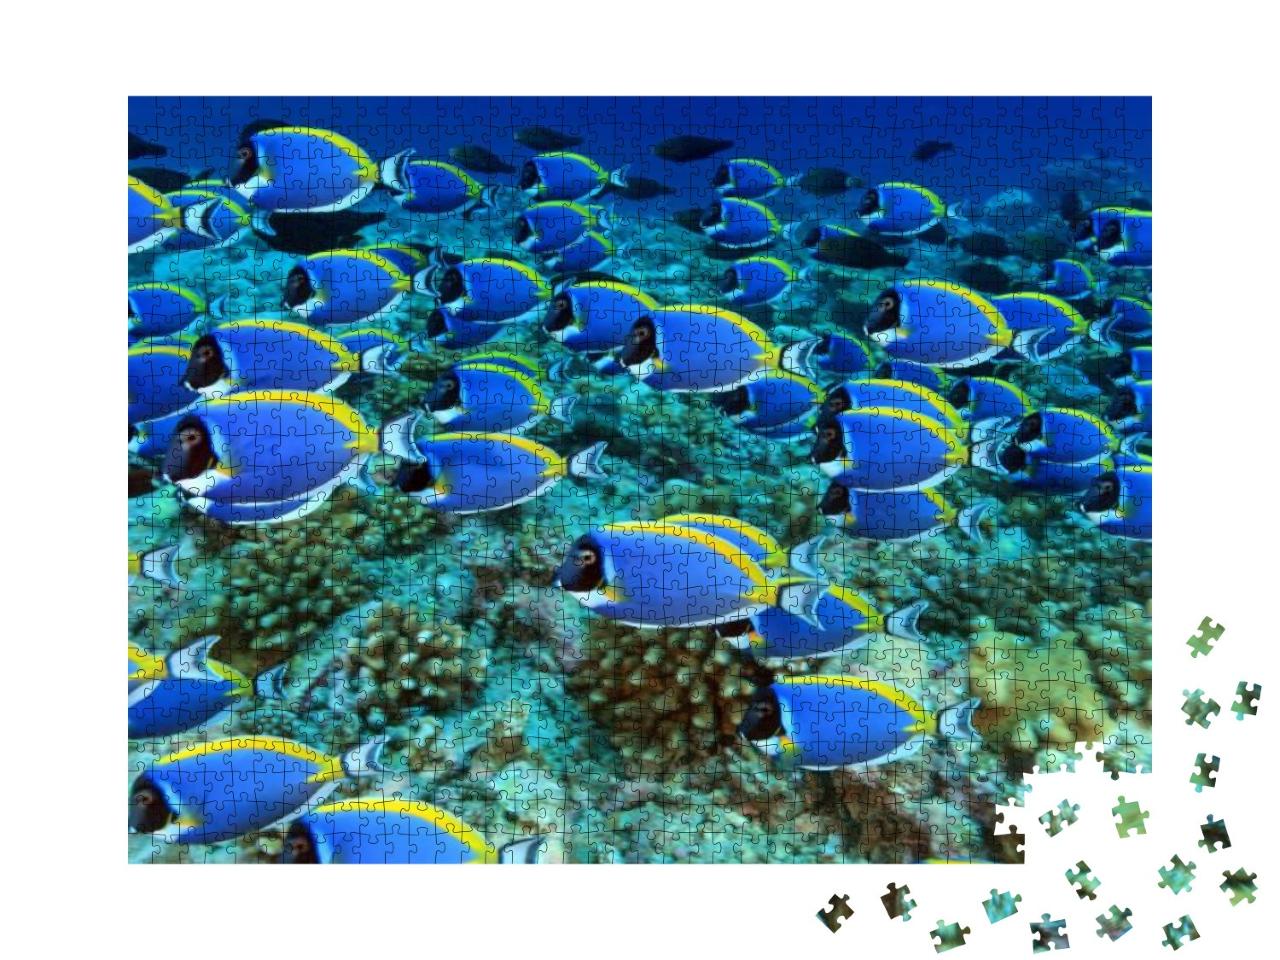 School of Powder Blue Tang in the Coral Reef... Jigsaw Puzzle with 1000 pieces